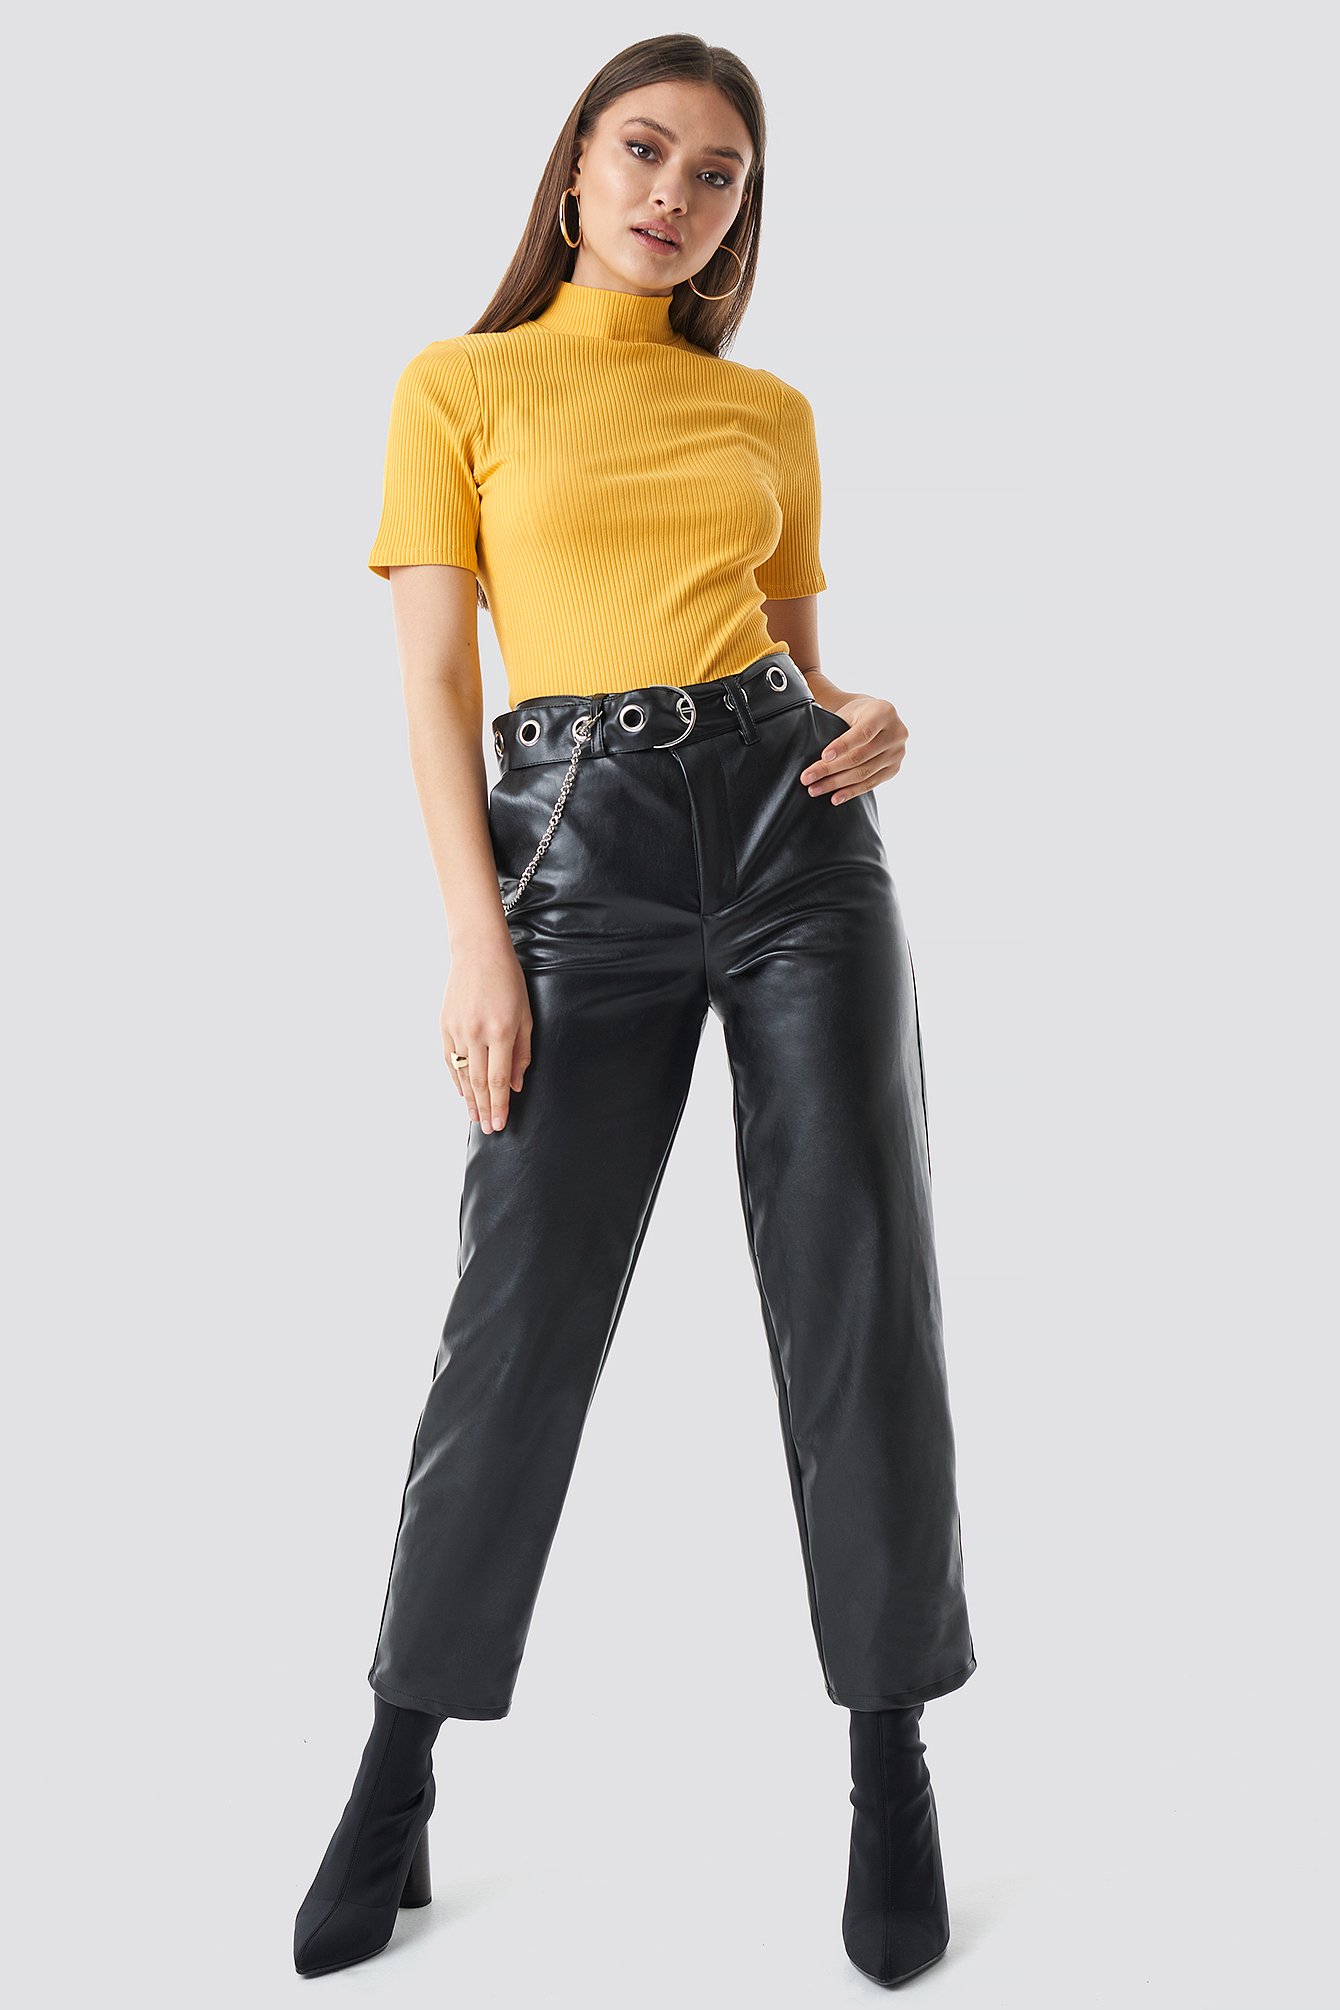 CHLOÉ Pu Leather Belted Pants Black